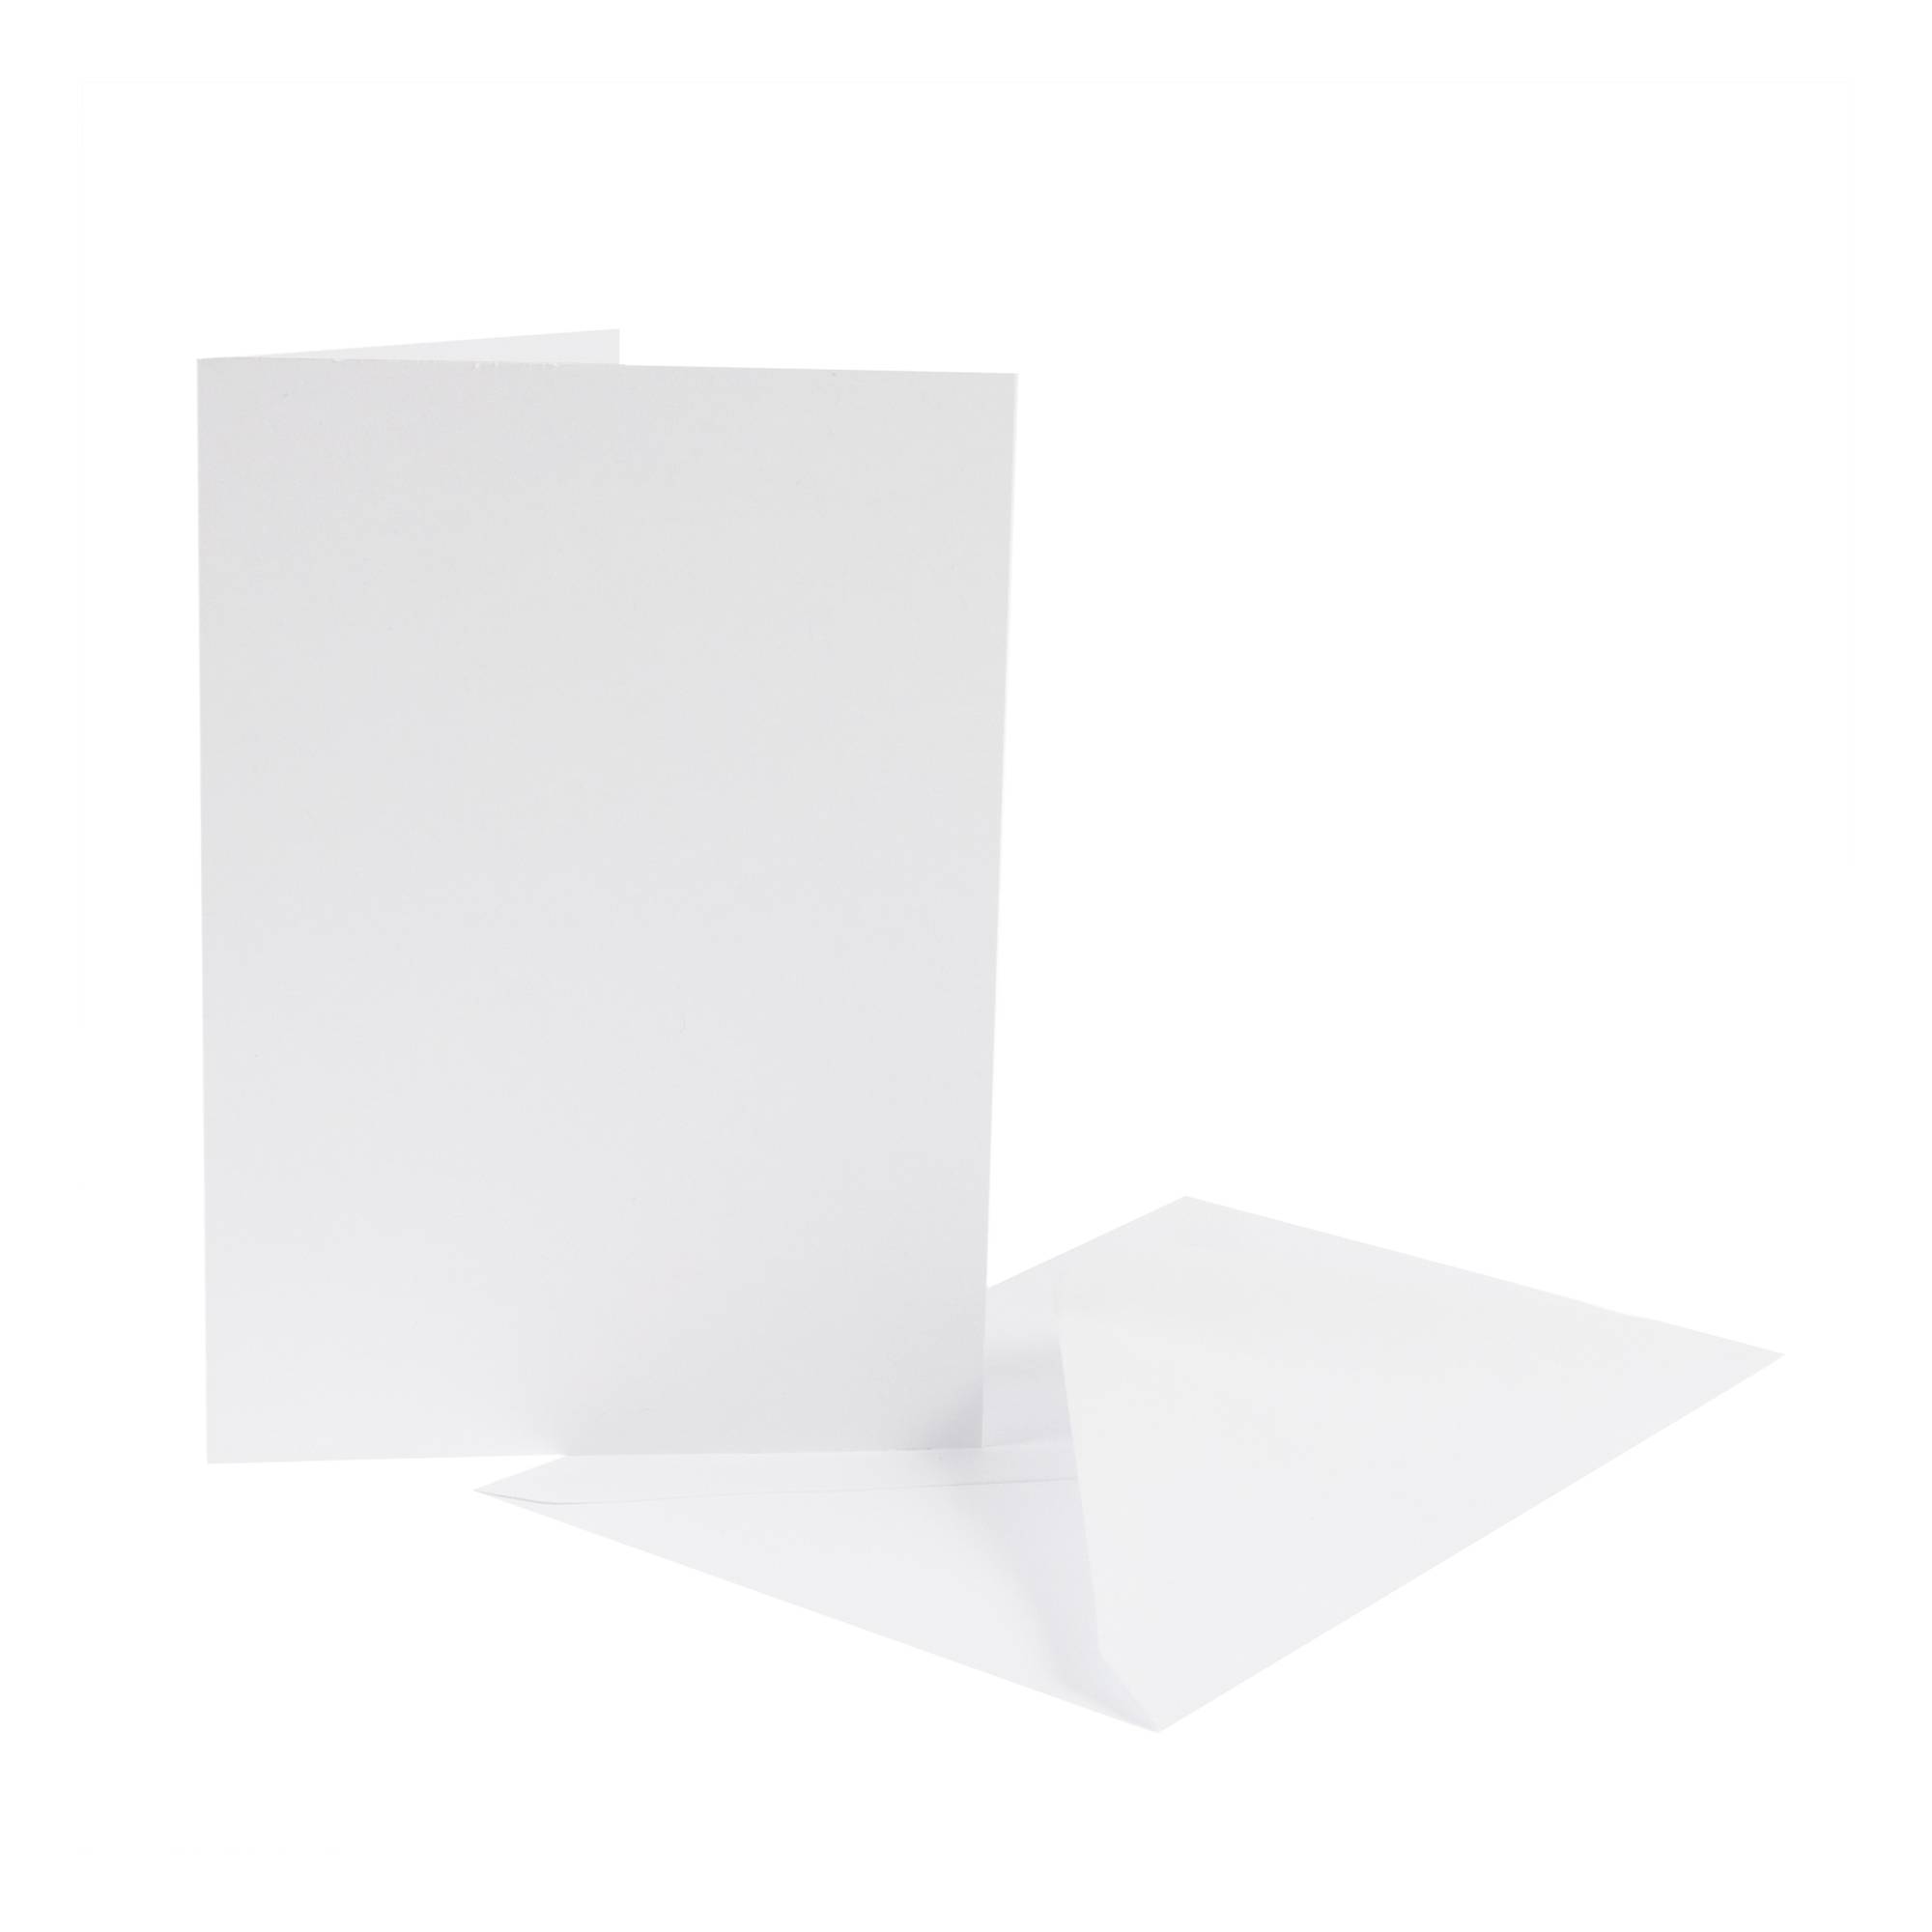 White Cards and Envelopes C6 Inches 50 Pack | Hobbycraft